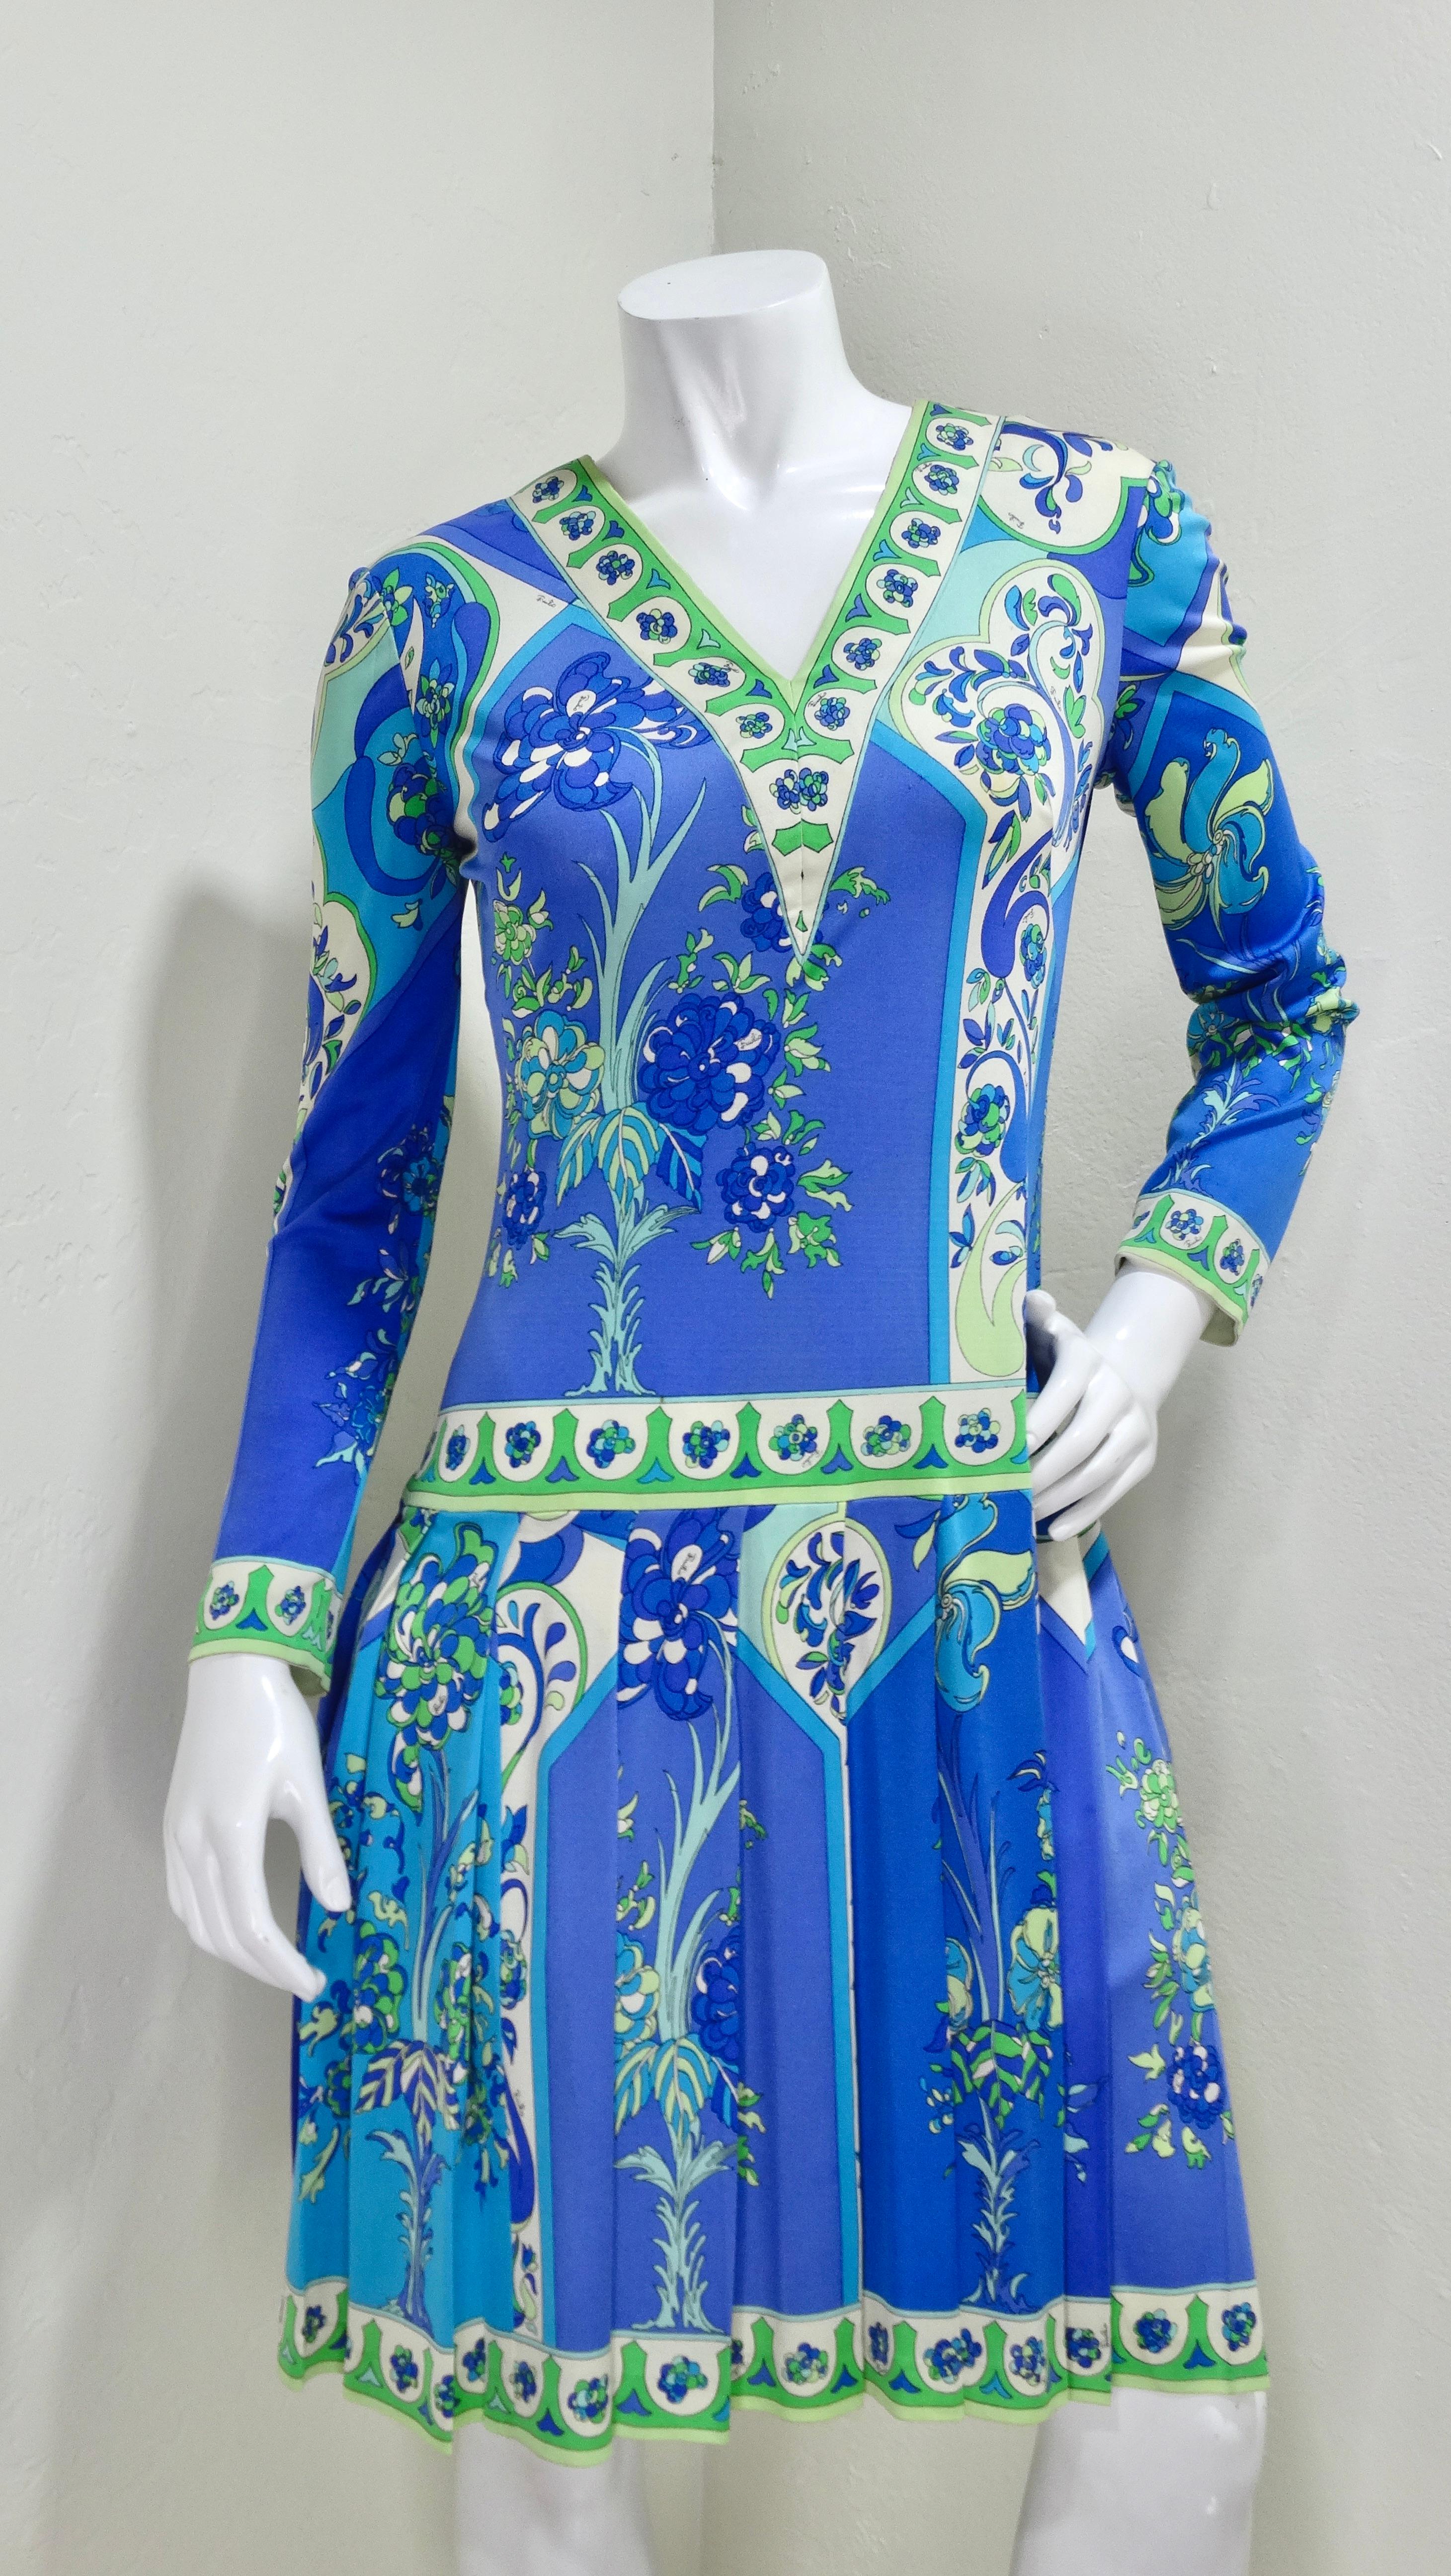 Don't miss out on the chance to get your hands on a a rare piece of Pucci. Look closely at the details like pleating on the bottom half and the smart use of pattern-blocking to give the illusion of a two-piece outfit. Features a full zip back and